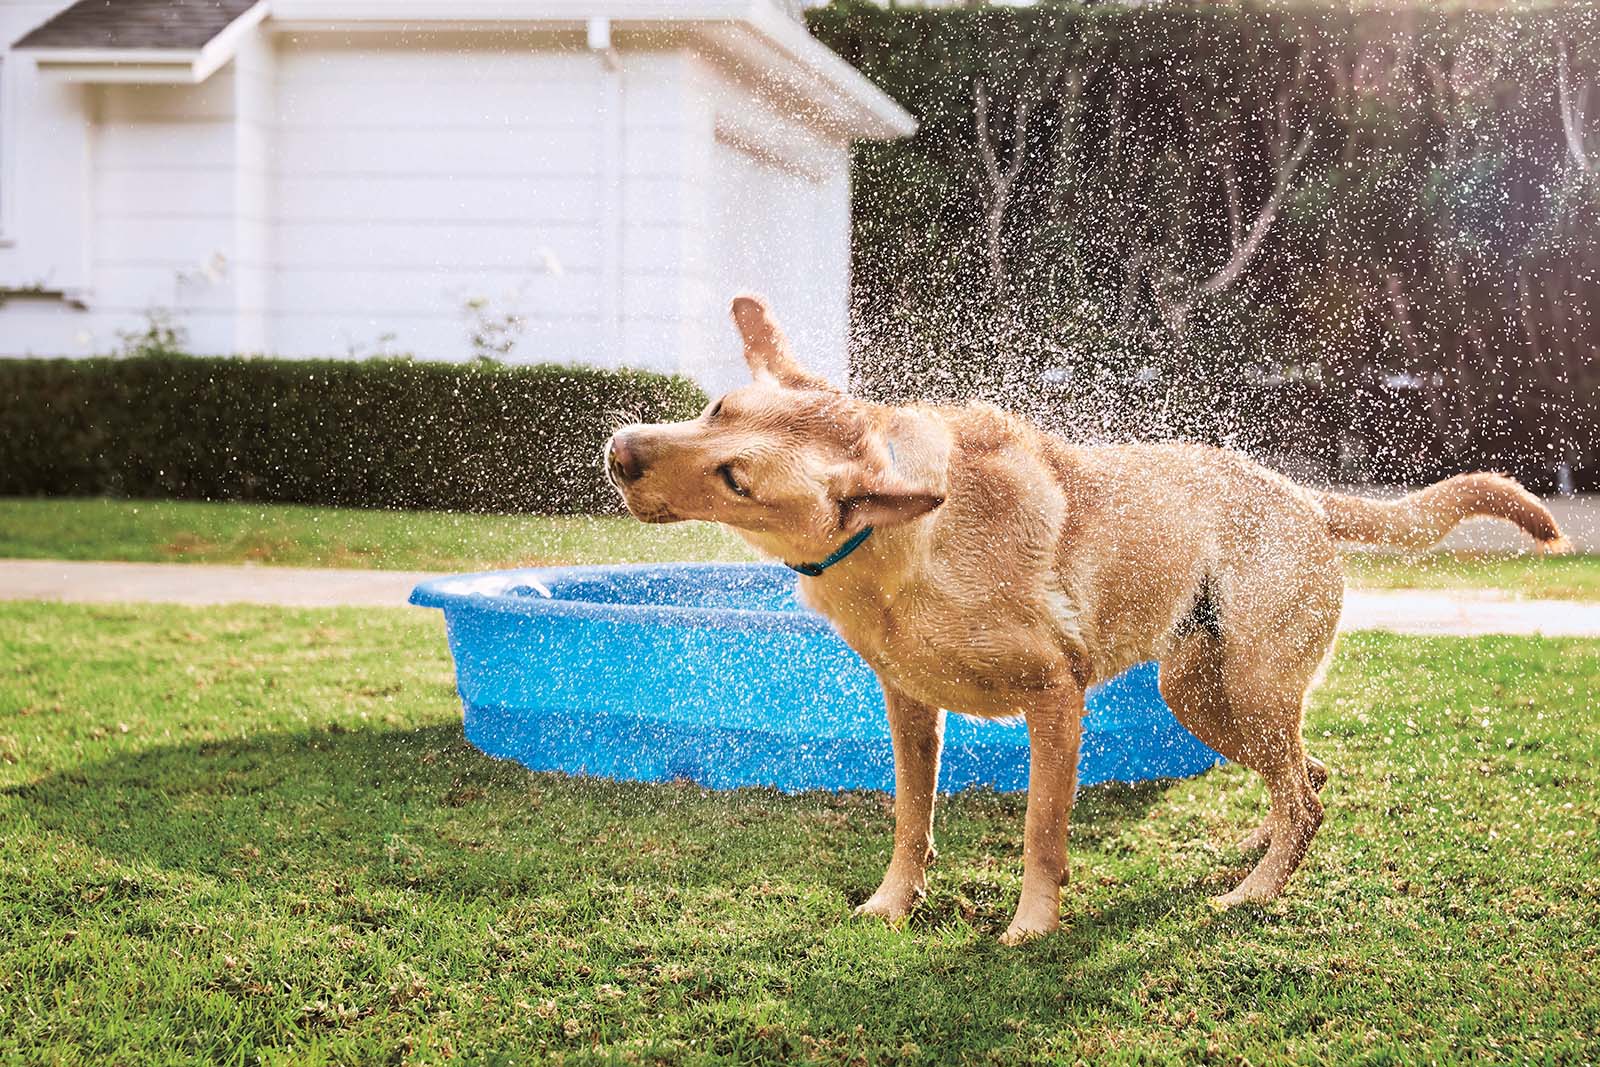 A golden Labrador is vigorously shaking off water in a sunny backyard, with droplets flying around. Behind the dog is a blue plastic kiddie pool and a white house. The scene captures a playful, joyful moment.